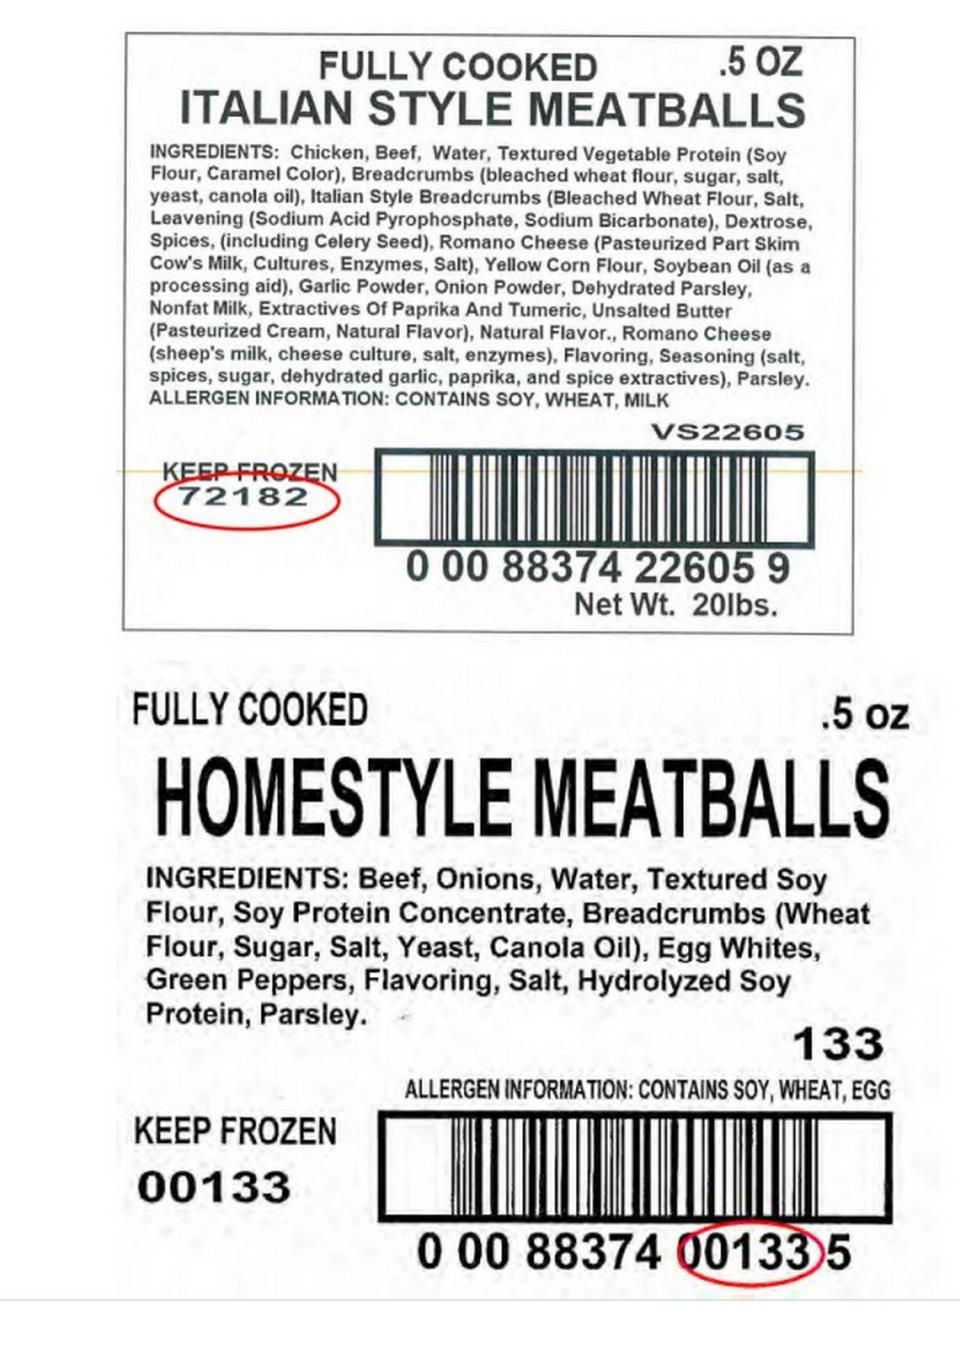 The recalled Italian meatball products, made by King’s Command Foods, a Washington-based company, contain egg, milk, and/or wheat, which are known allergens. These ingredients were not declared on the products’ labels.